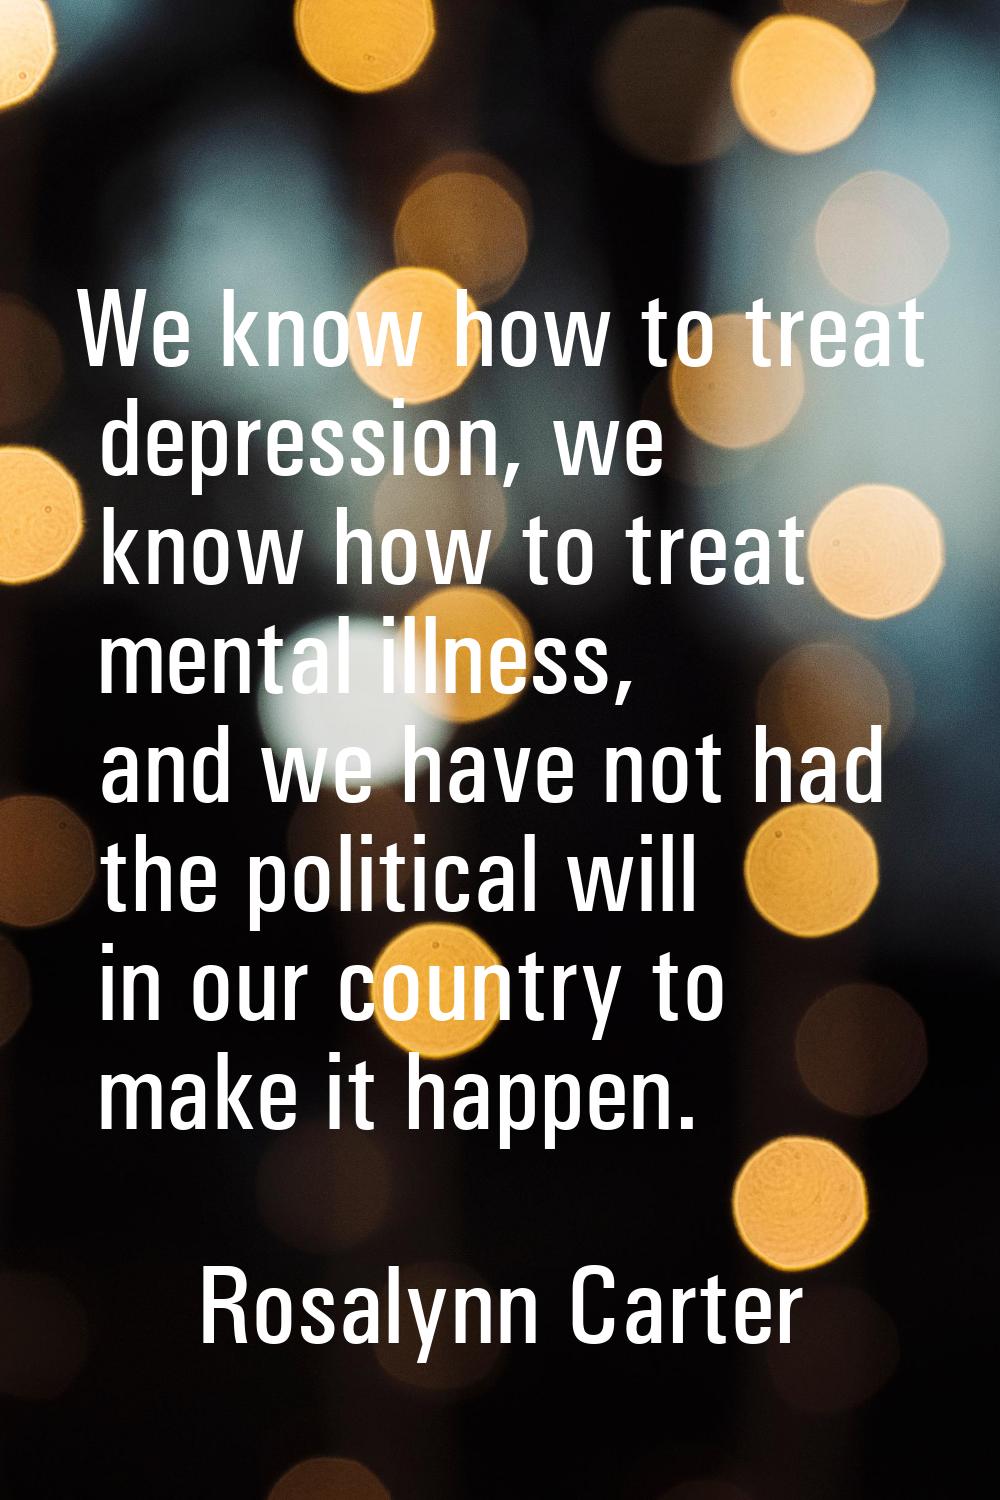 We know how to treat depression, we know how to treat mental illness, and we have not had the polit